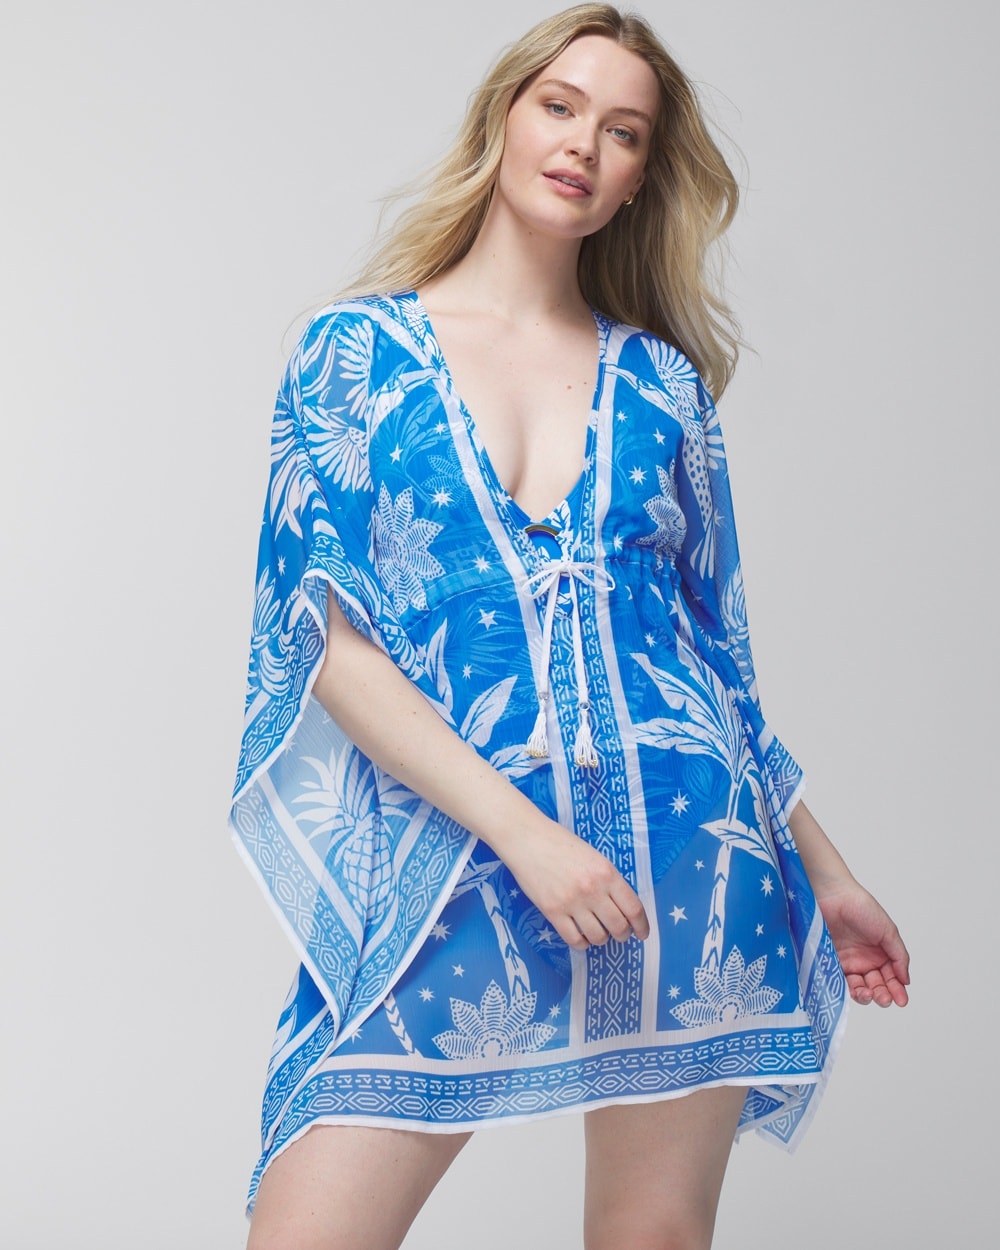 Soma Women's Bleu Rod A Pace In The Sun Caftan Cover-up In Big Sur Blue Size Medium |